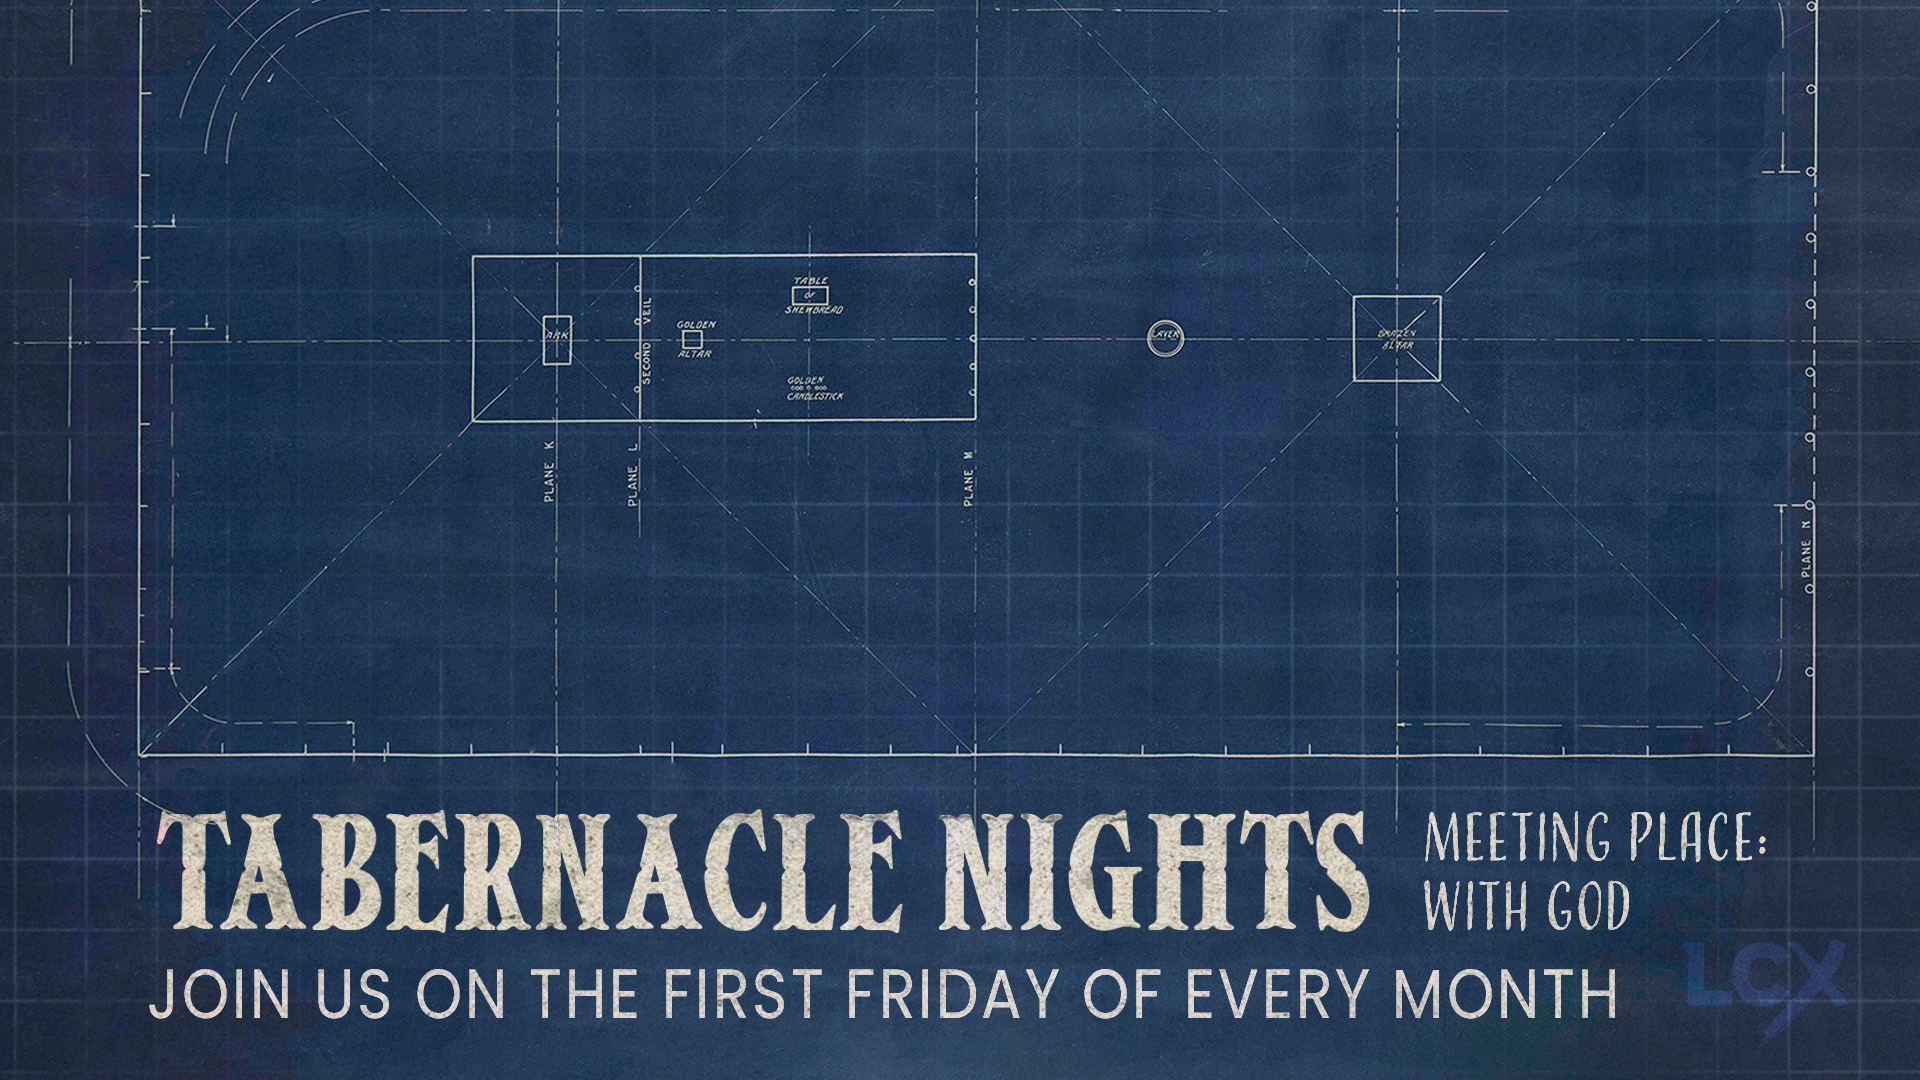 Tabernacle Nights Event at LifechurchX in Jerseyville, IL and Columbia, IL